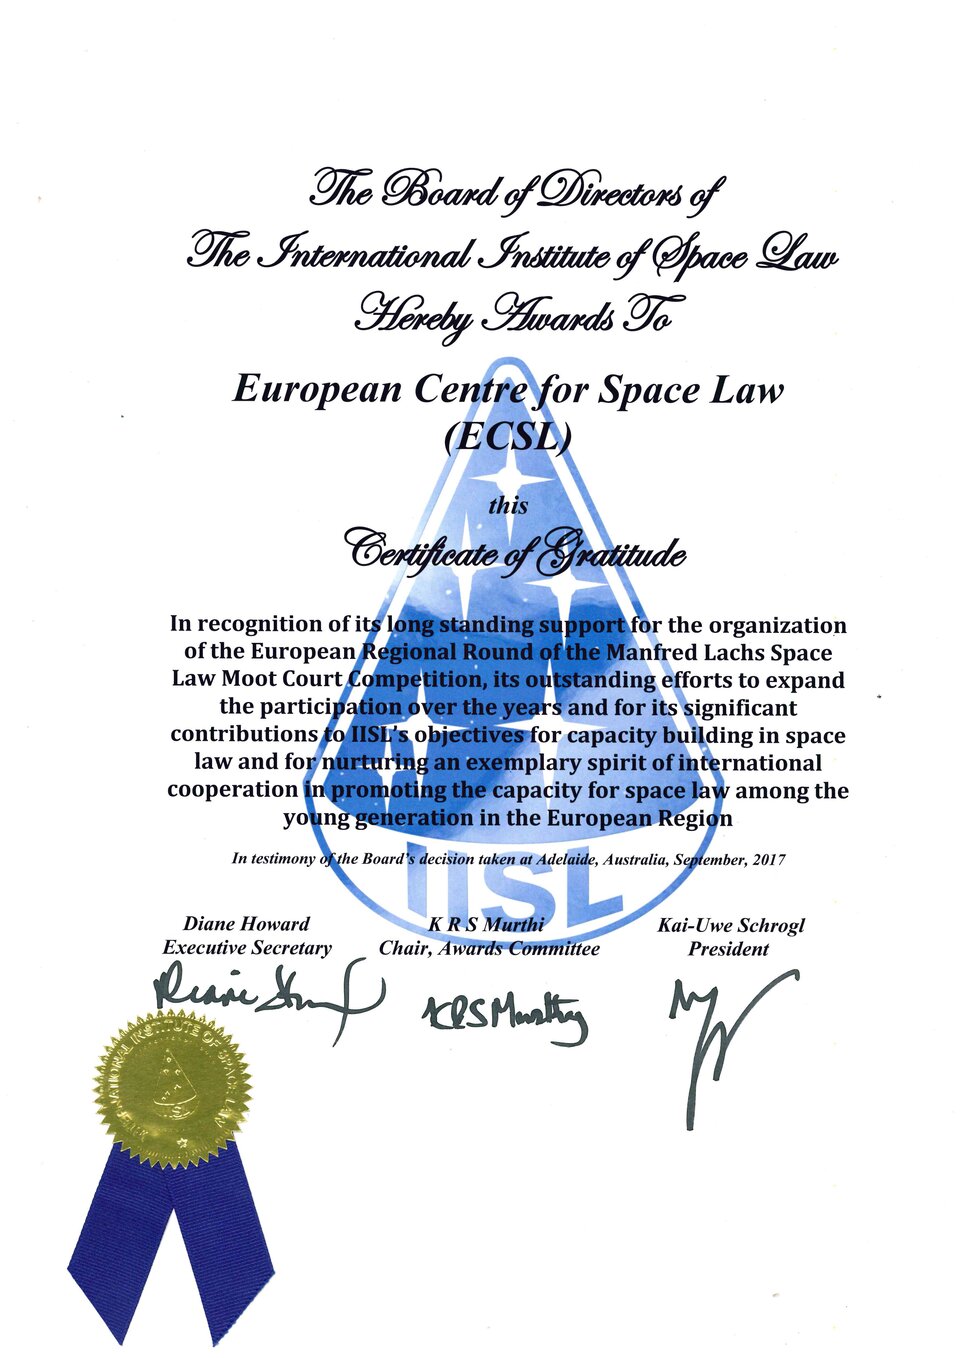 The Certificate of Gratitude awarded to the ECSL by the Board of Directors of the IISL